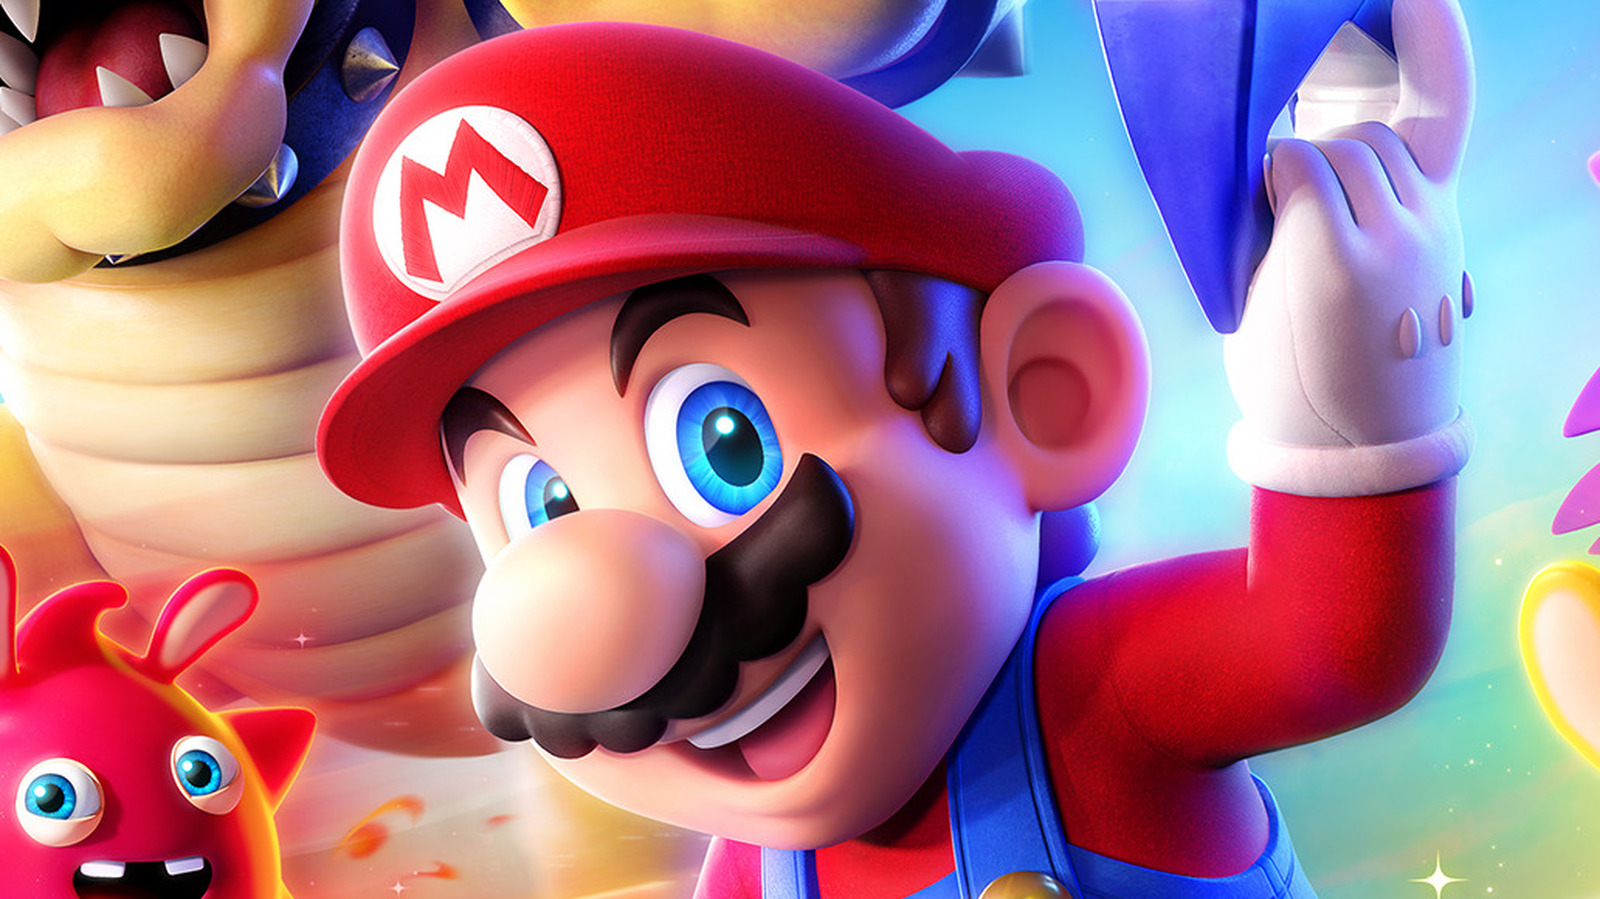 Every Spark Confirmed for Mario + Rabbids Sparks of Hope So Far